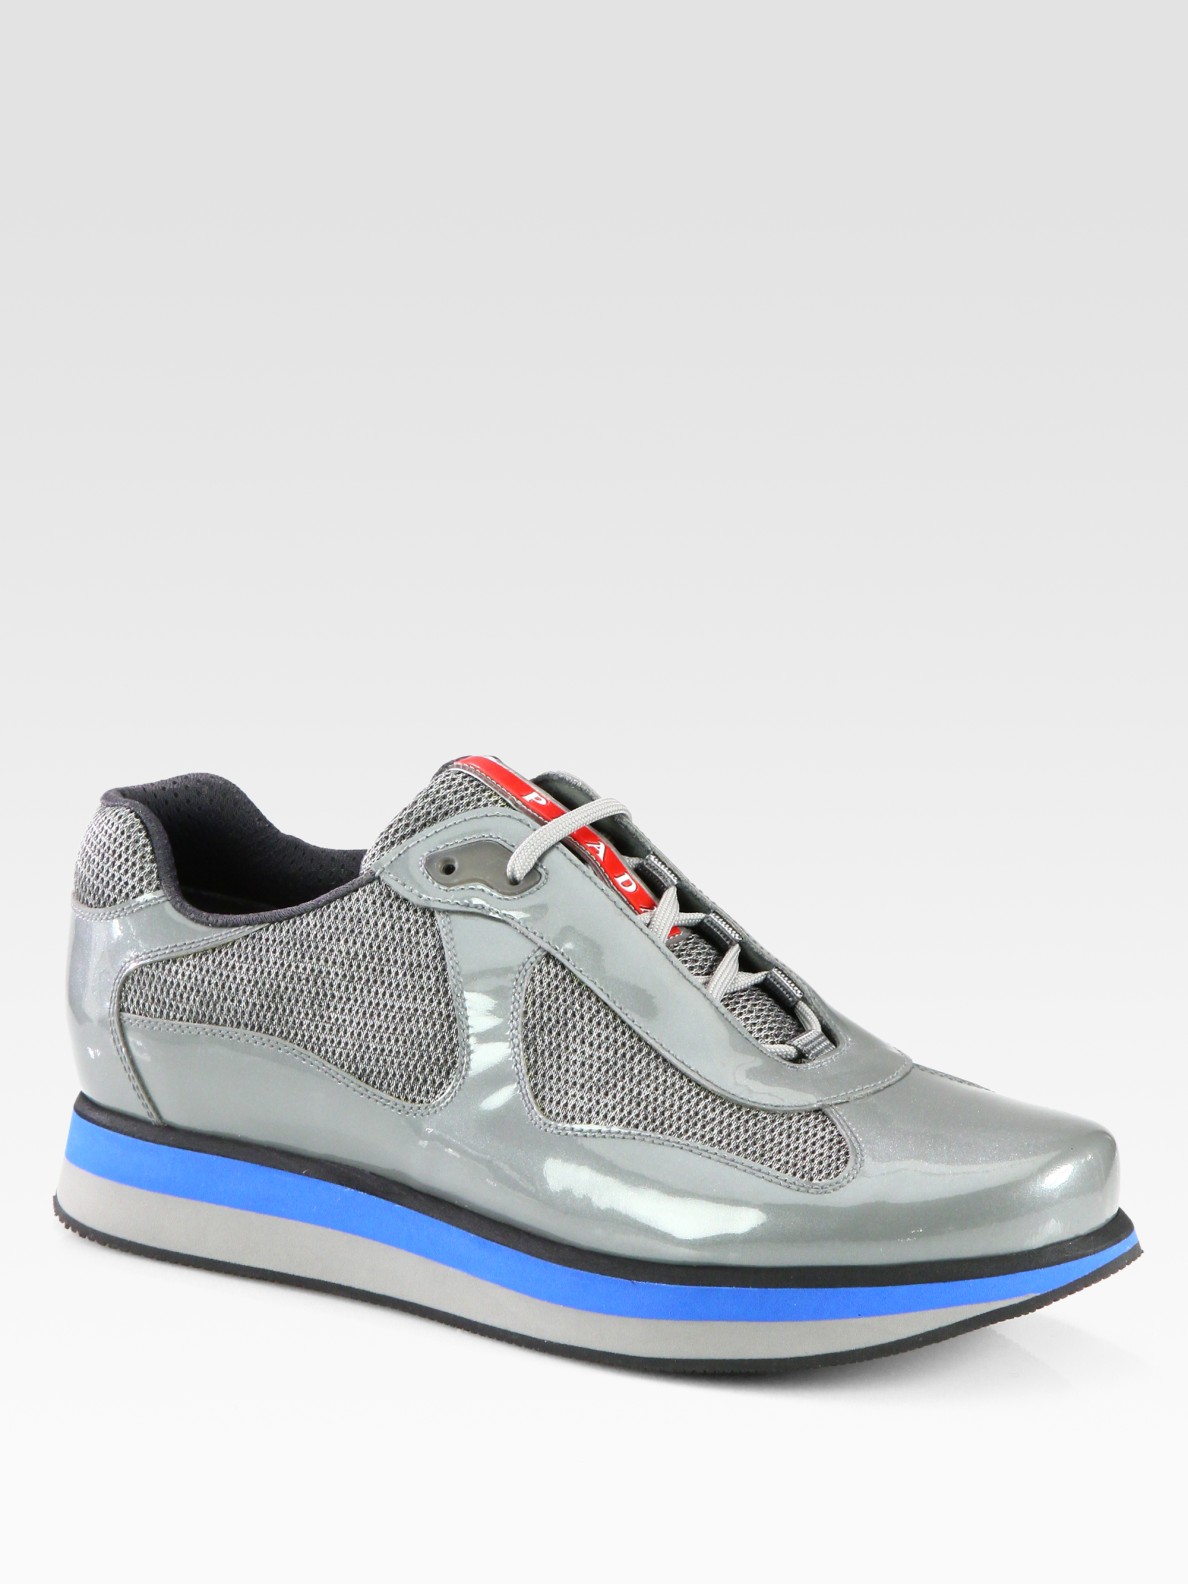 Prada Americas Cup Patent Leather Sneakers in Grey (Gray) for Men - Lyst